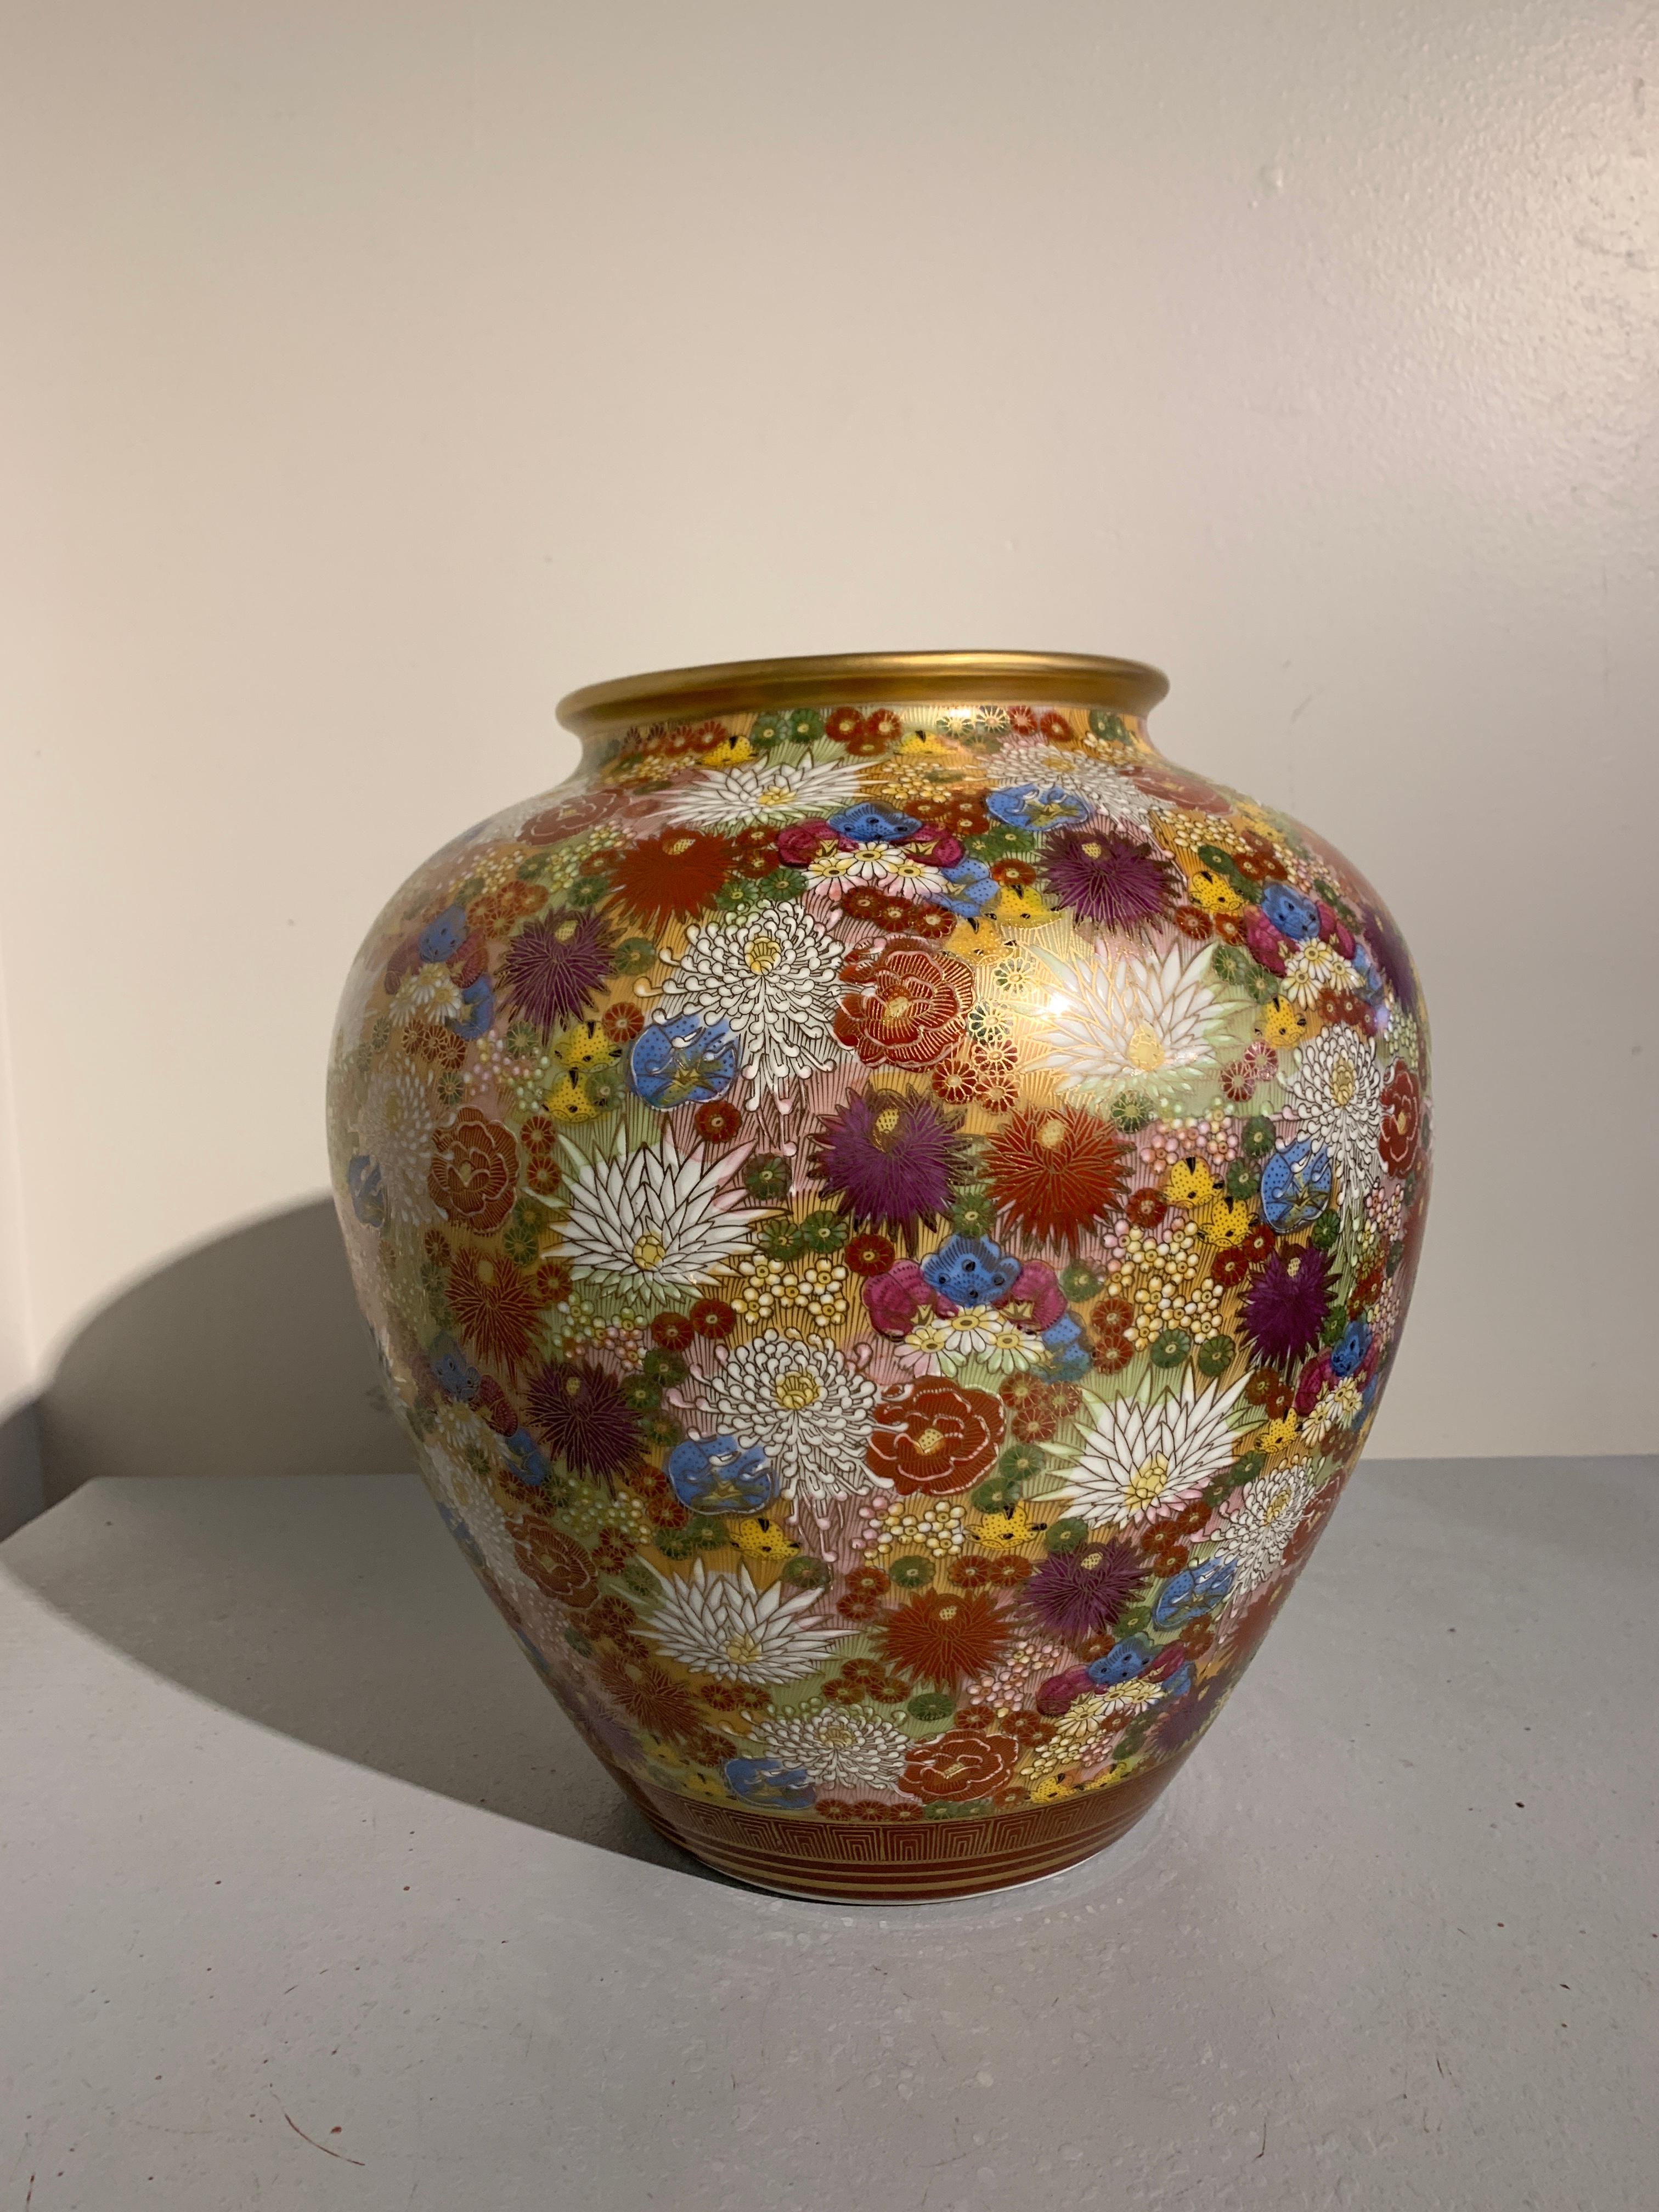 A fine and large Japanese Kutani millefleurs vase, signed Shozan, Showa Era, mid-late 20th century.

The vase of globular form, with a short neck and wide, everted mouth. The body meticulously and exuberantly painted with a millefleurs (thousand